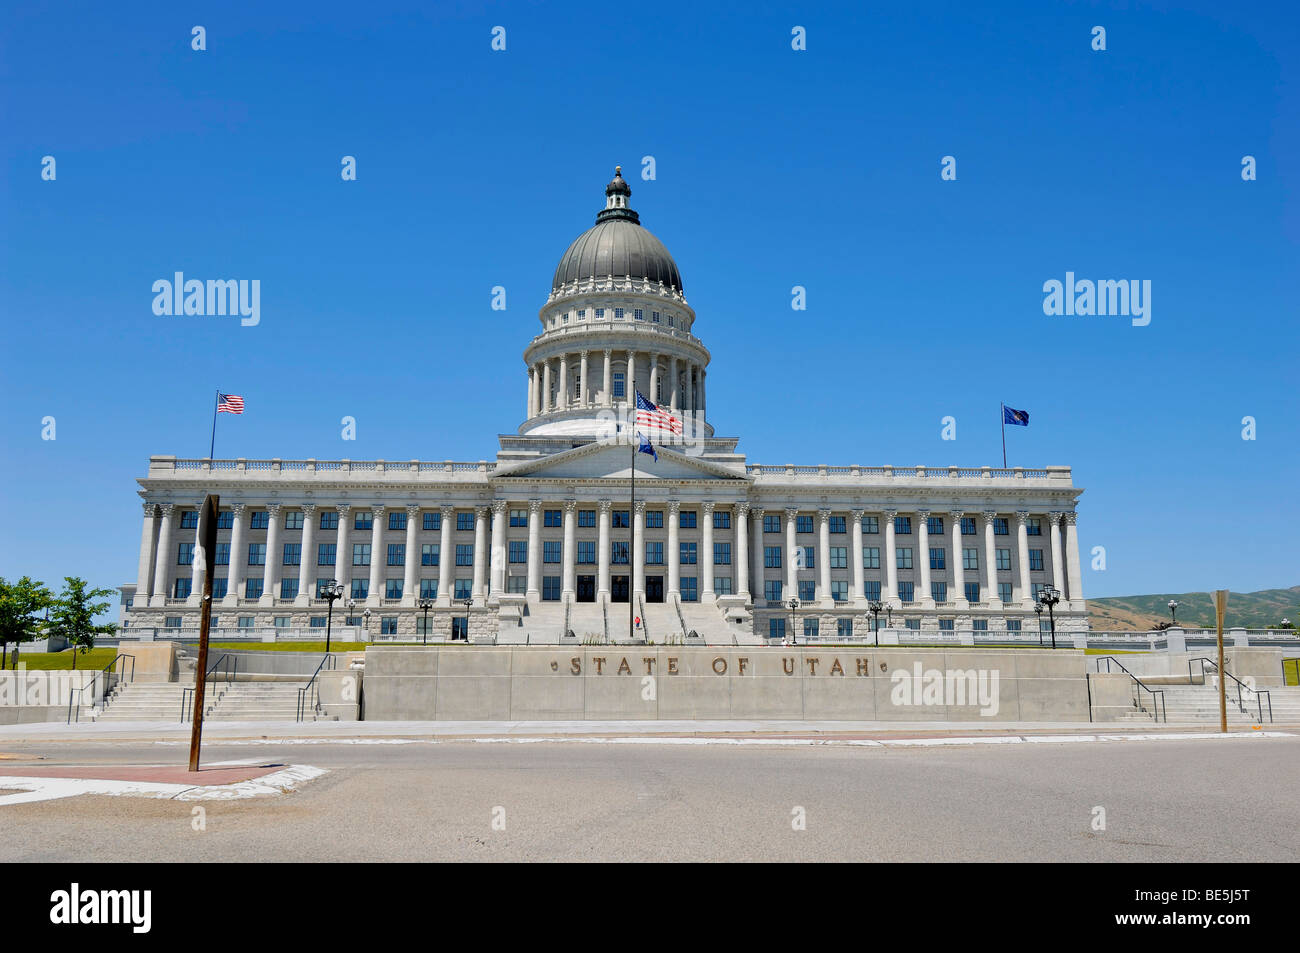 The recently remodeled Utah State Capitol overlooks downtown Salt Lake City, Utah, United States of America. Stock Photo